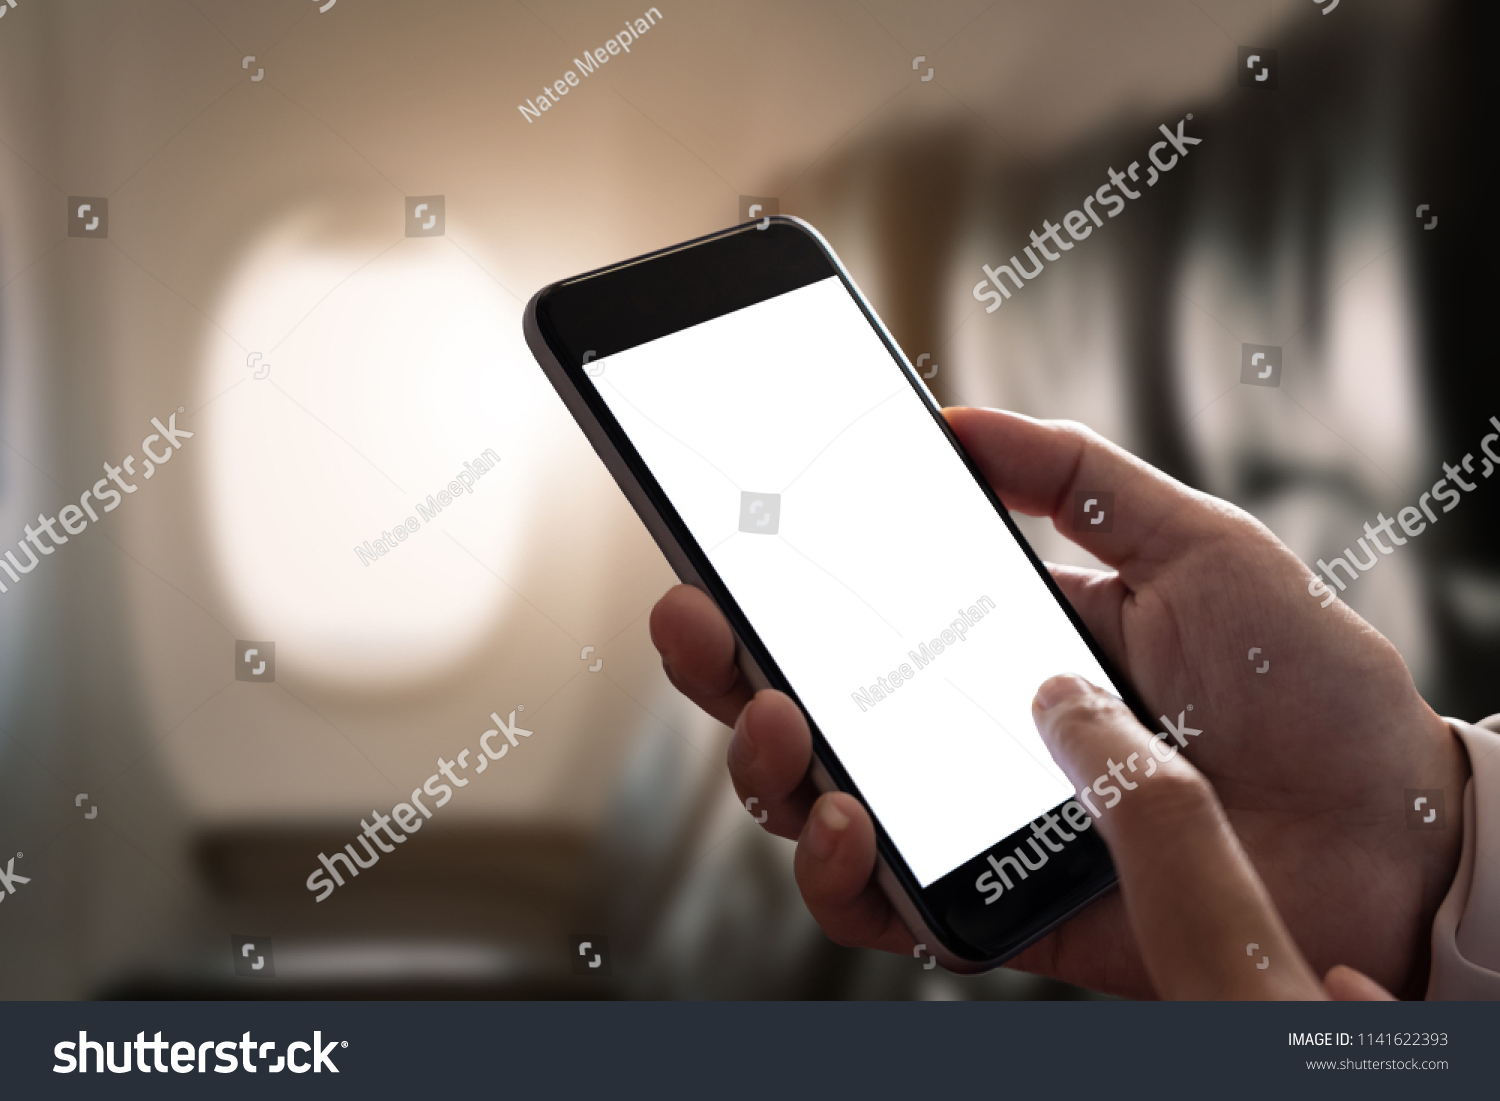 Mockup image of a hand holding a smart phone with blank desktop screen on airplane window, Blank screen mobile phone for graphic display montage #1141622393